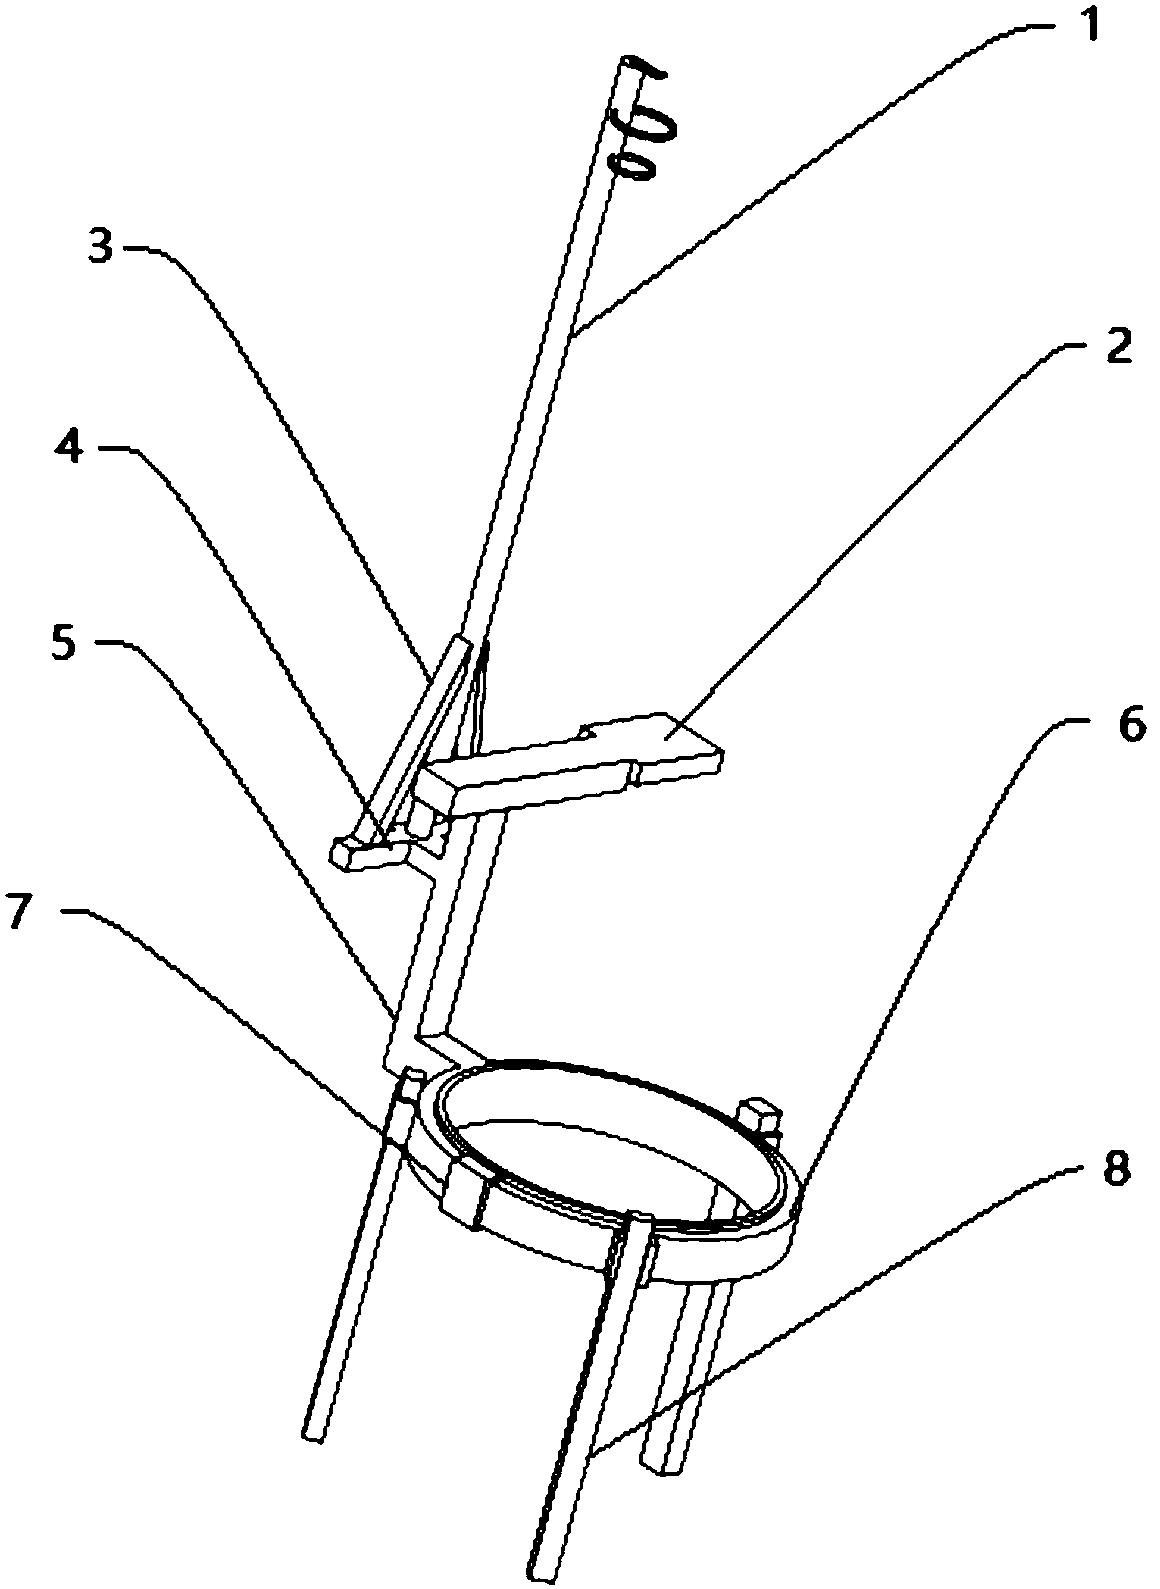 Auxiliary device for medical infusion support